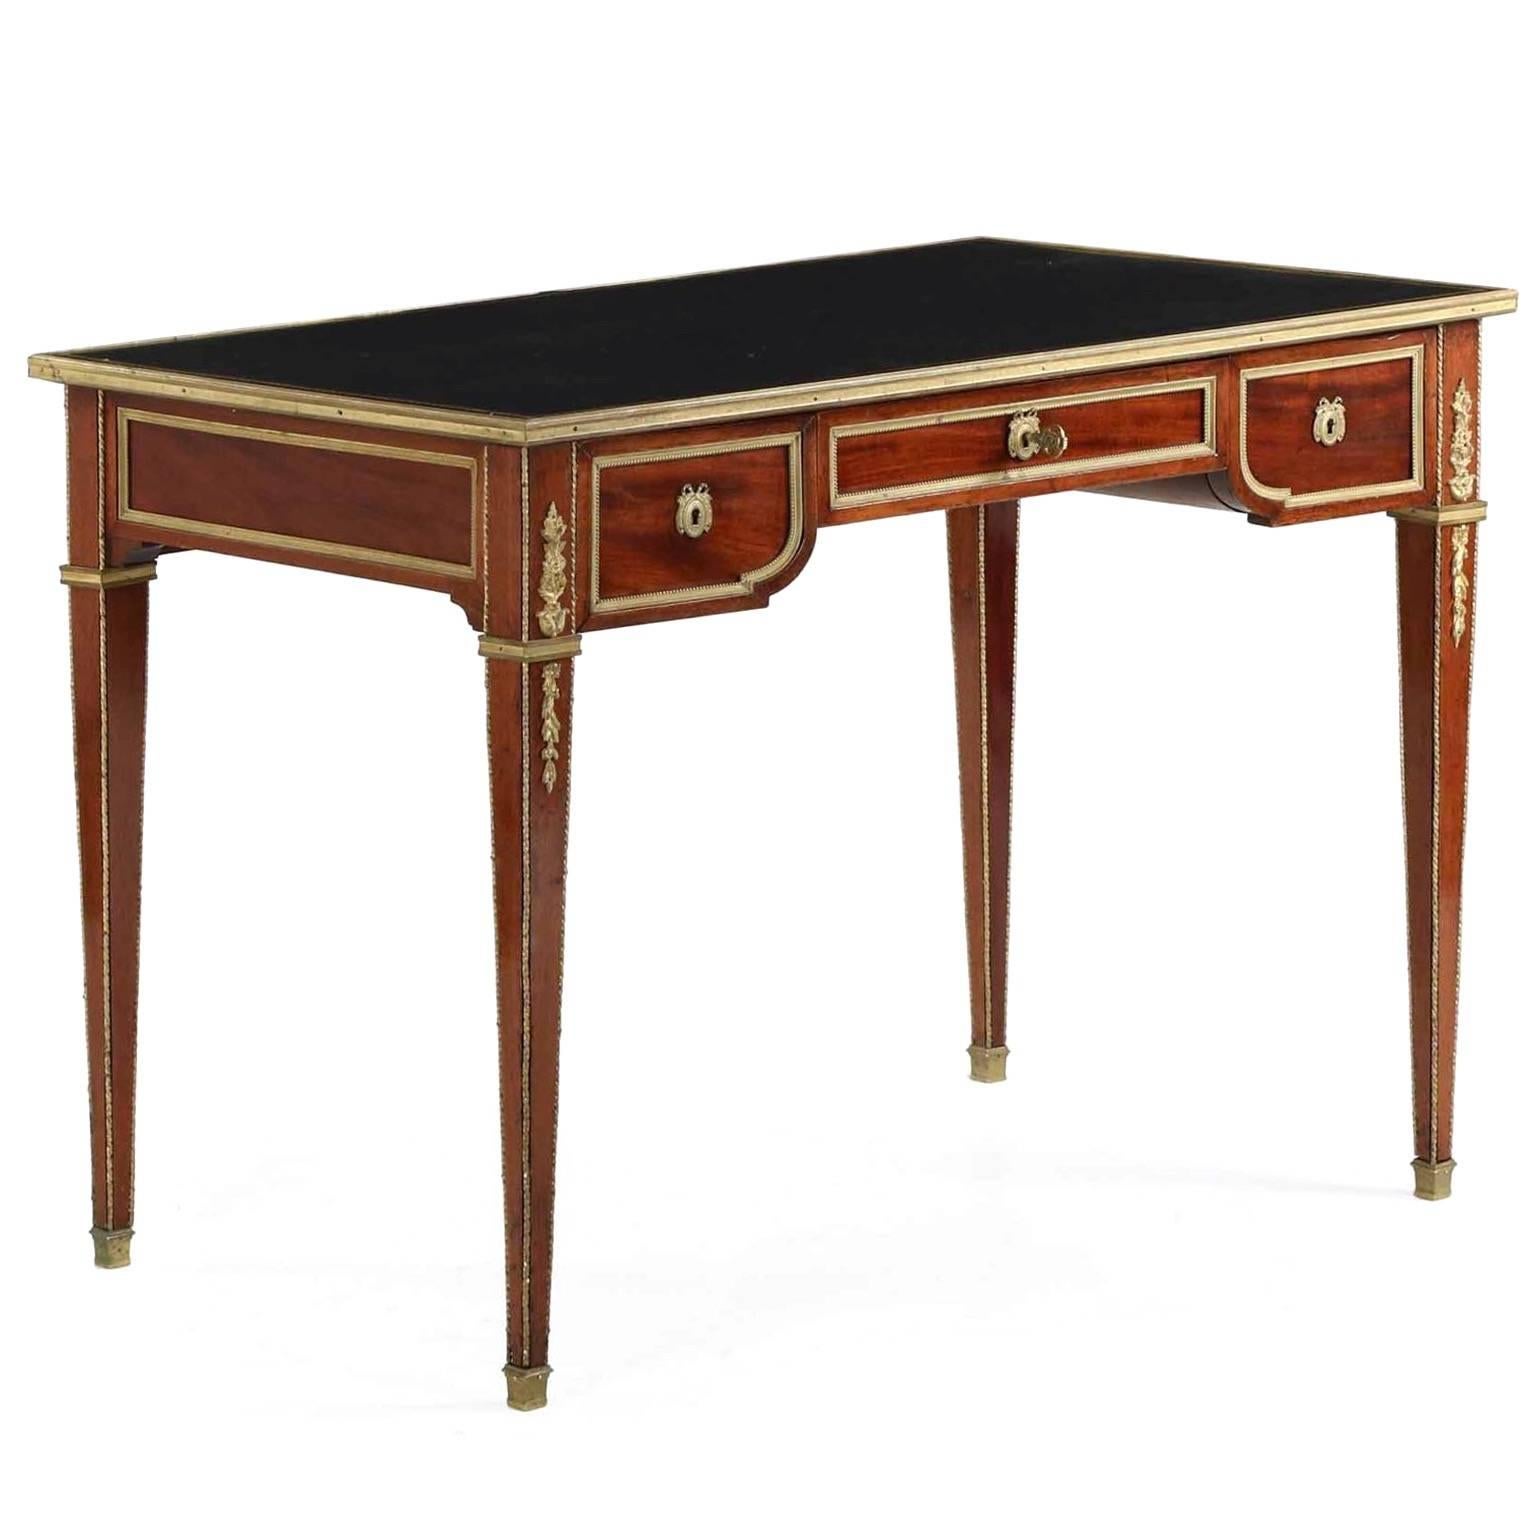 A refined and elegant writing table crafted during France’s opulent Belle Époque period, this crisp and angular little neoclassical bureau plat exhibits the best of the period. Vibrant ruby mahogany woods are used throughout all primary surfaces